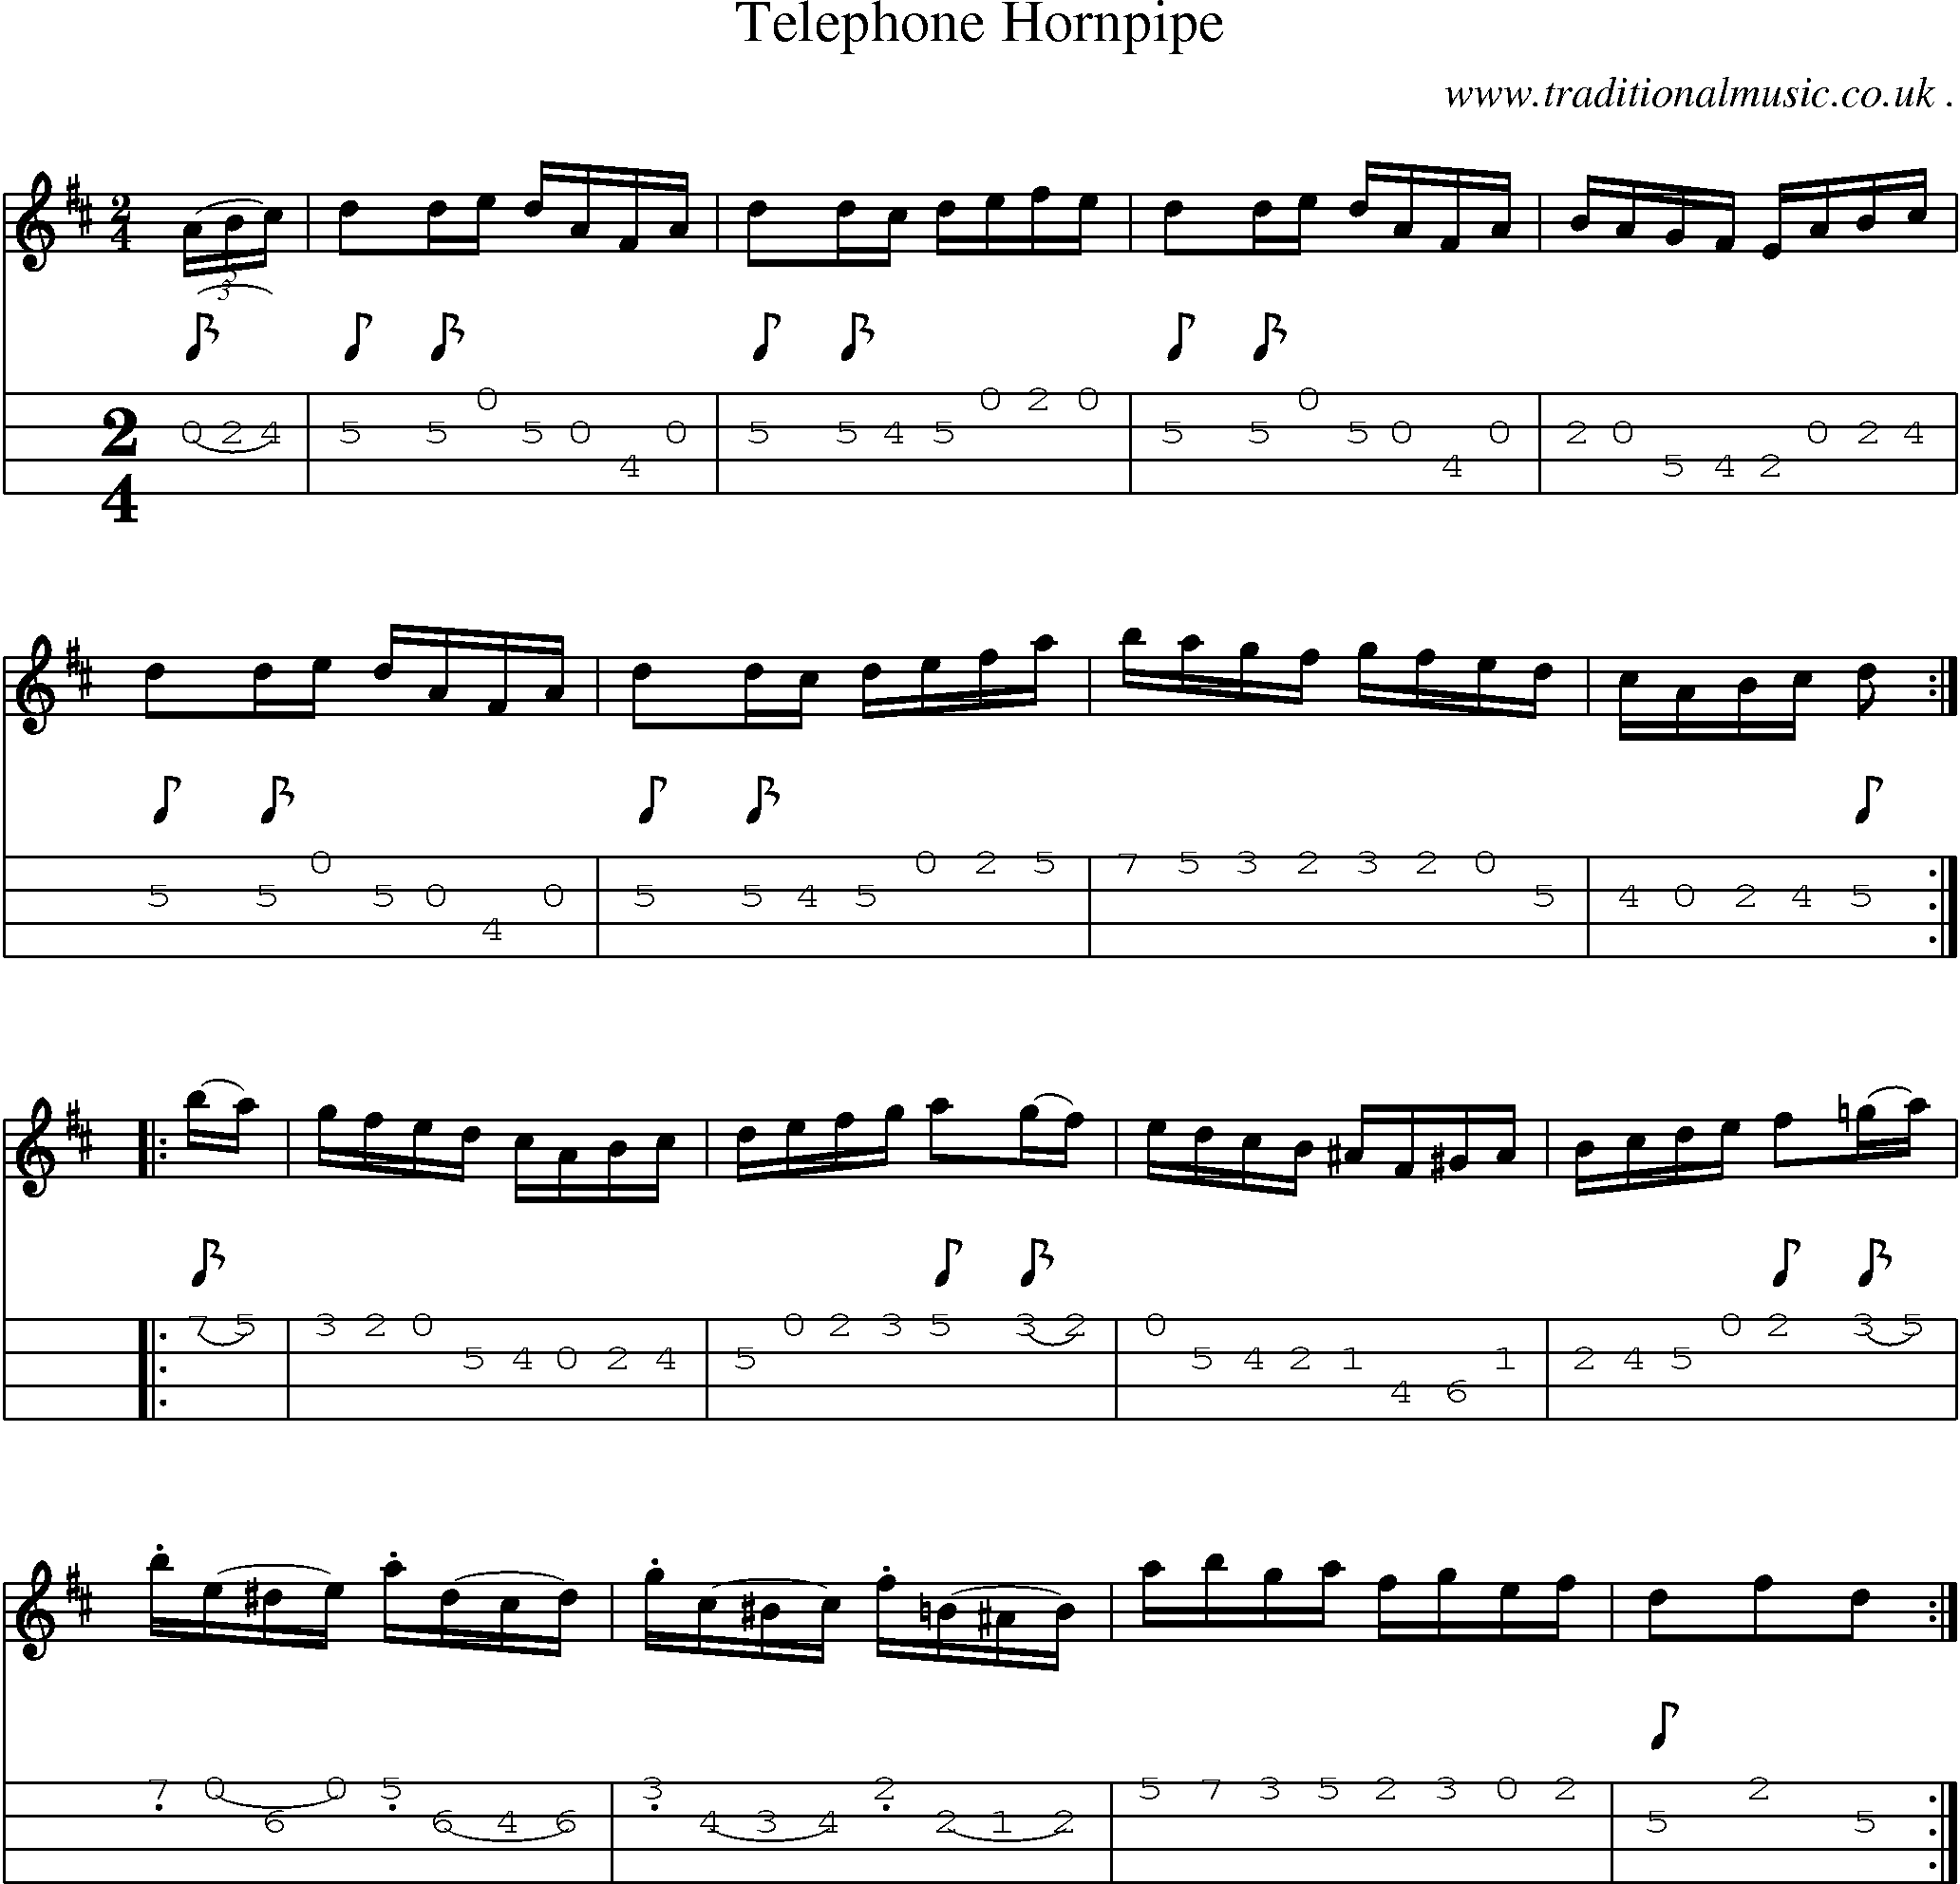 Sheet-Music and Mandolin Tabs for Telephone Hornpipe